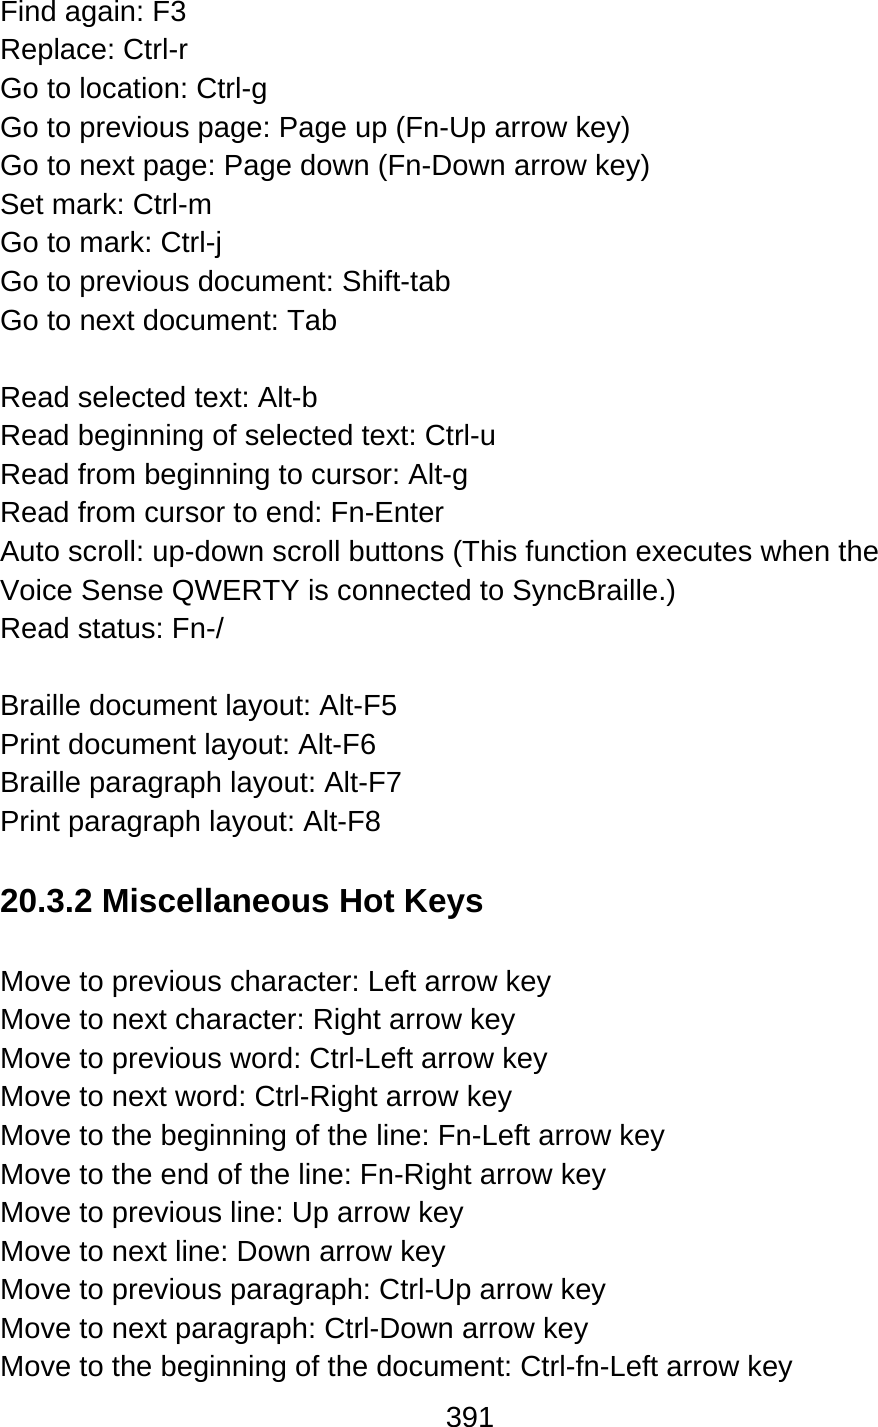 391  Find again: F3 Replace: Ctrl-r   Go to location: Ctrl-g Go to previous page: Page up (Fn-Up arrow key) Go to next page: Page down (Fn-Down arrow key) Set mark: Ctrl-m   Go to mark: Ctrl-j Go to previous document: Shift-tab Go to next document: Tab  Read selected text: Alt-b Read beginning of selected text: Ctrl-u   Read from beginning to cursor: Alt-g Read from cursor to end: Fn-Enter Auto scroll: up-down scroll buttons (This function executes when the Voice Sense QWERTY is connected to SyncBraille.) Read status: Fn-/  Braille document layout: Alt-F5 Print document layout: Alt-F6 Braille paragraph layout: Alt-F7 Print paragraph layout: Alt-F8  20.3.2 Miscellaneous Hot Keys  Move to previous character: Left arrow key Move to next character: Right arrow key Move to previous word: Ctrl-Left arrow key Move to next word: Ctrl-Right arrow key Move to the beginning of the line: Fn-Left arrow key Move to the end of the line: Fn-Right arrow key Move to previous line: Up arrow key Move to next line: Down arrow key Move to previous paragraph: Ctrl-Up arrow key   Move to next paragraph: Ctrl-Down arrow key Move to the beginning of the document: Ctrl-fn-Left arrow key 